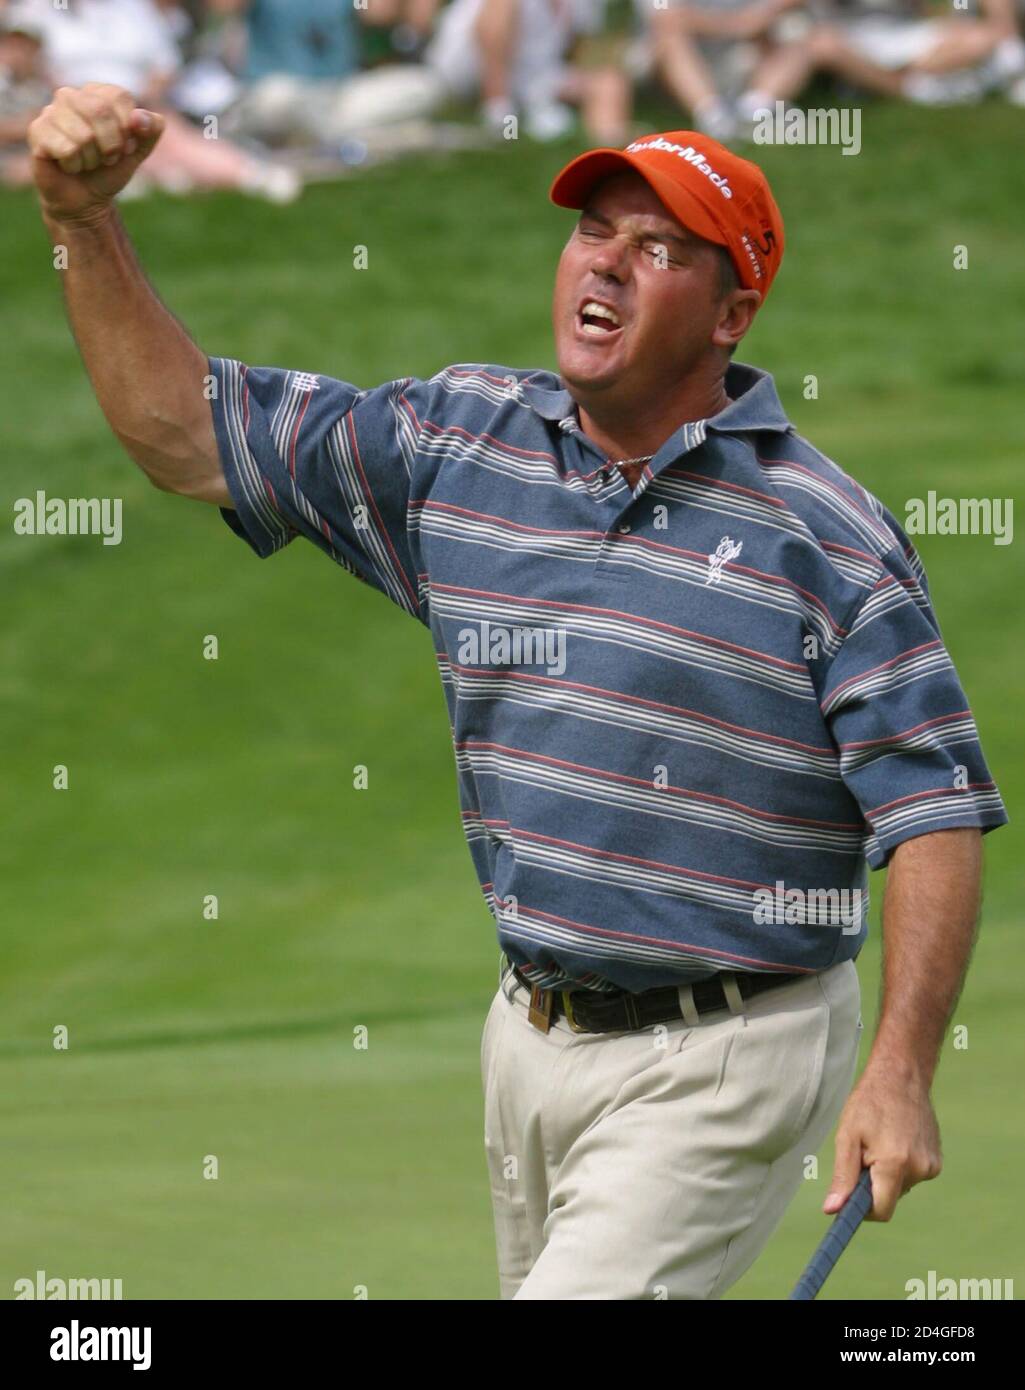 Rich Beem of the United States celebrates his eagle on the 17th hole of the final round of the International in Castle Rock, Colorado August 4, 2002. Beem edged out Steve Lowrey 44-43 in the modified Stableford scoring to win the International. REUTERS/Gary C. Caskey  GCC/SV Stock Photo